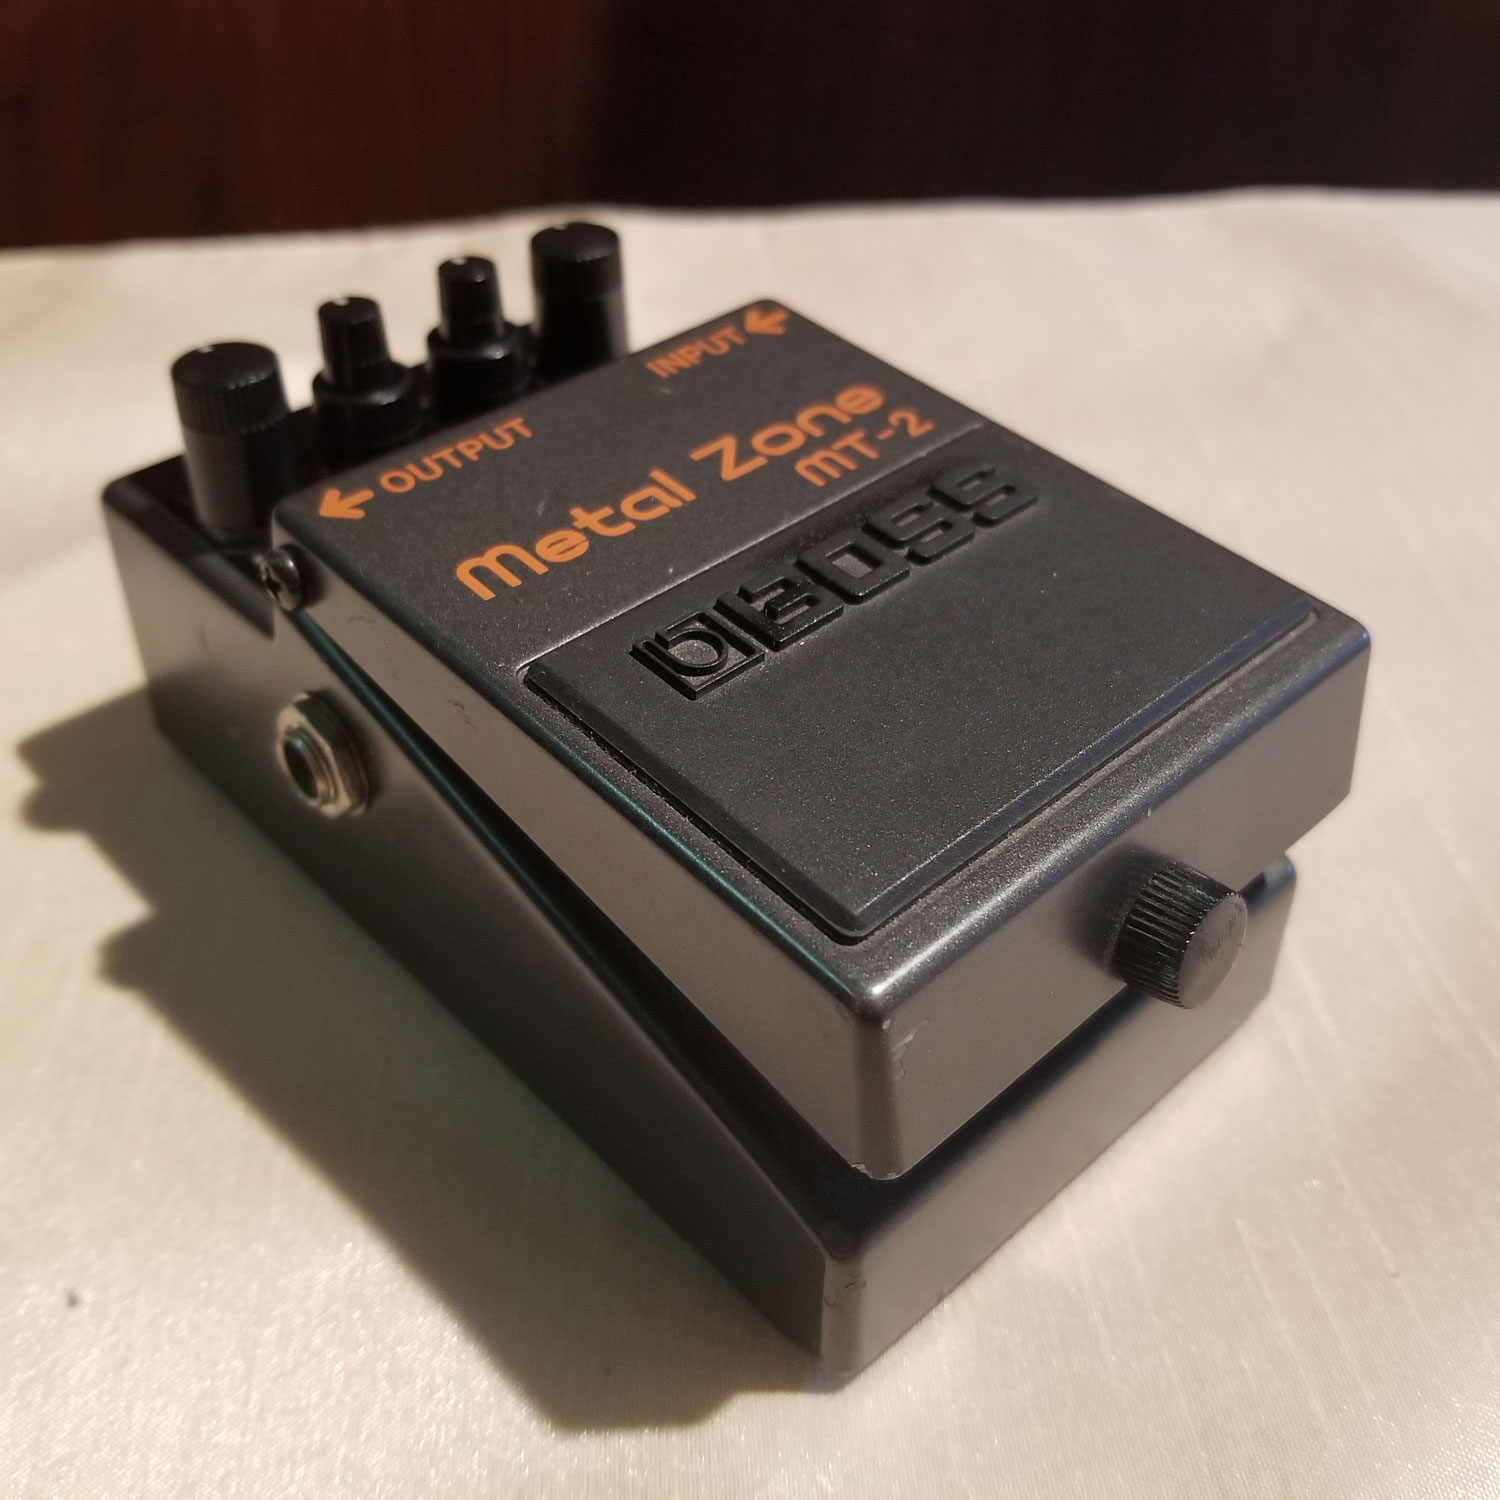 USED Boss MT-2 Metal Zone Effects Pedal